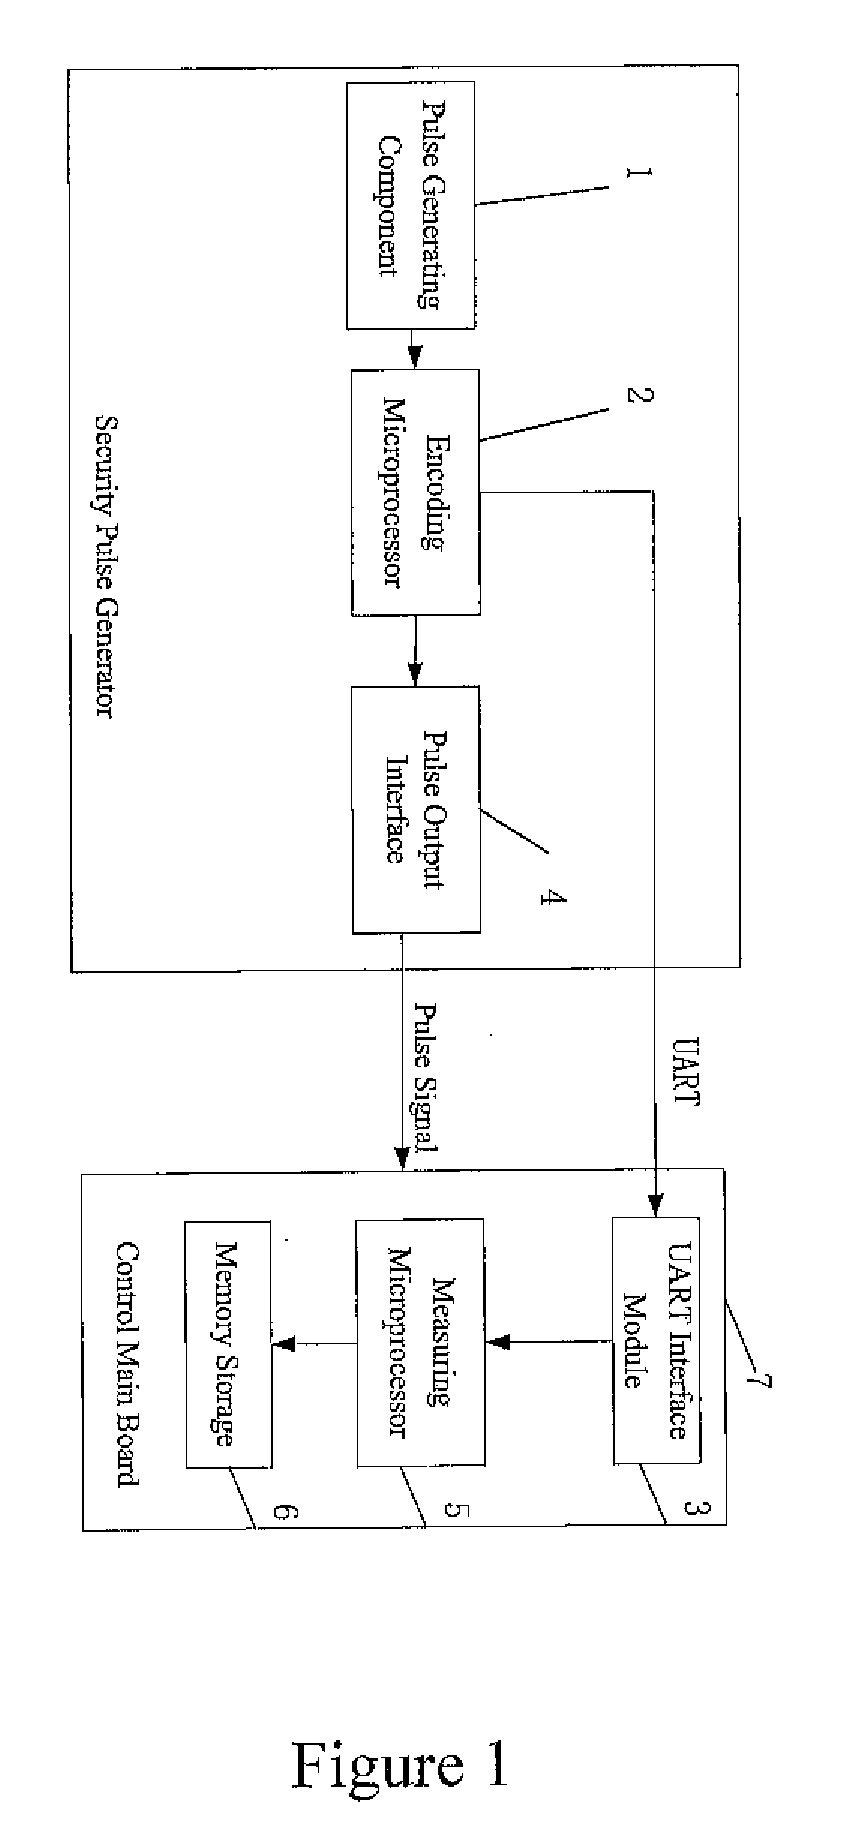 Safety pulser for fuel dispenser and method for judging fraud activity